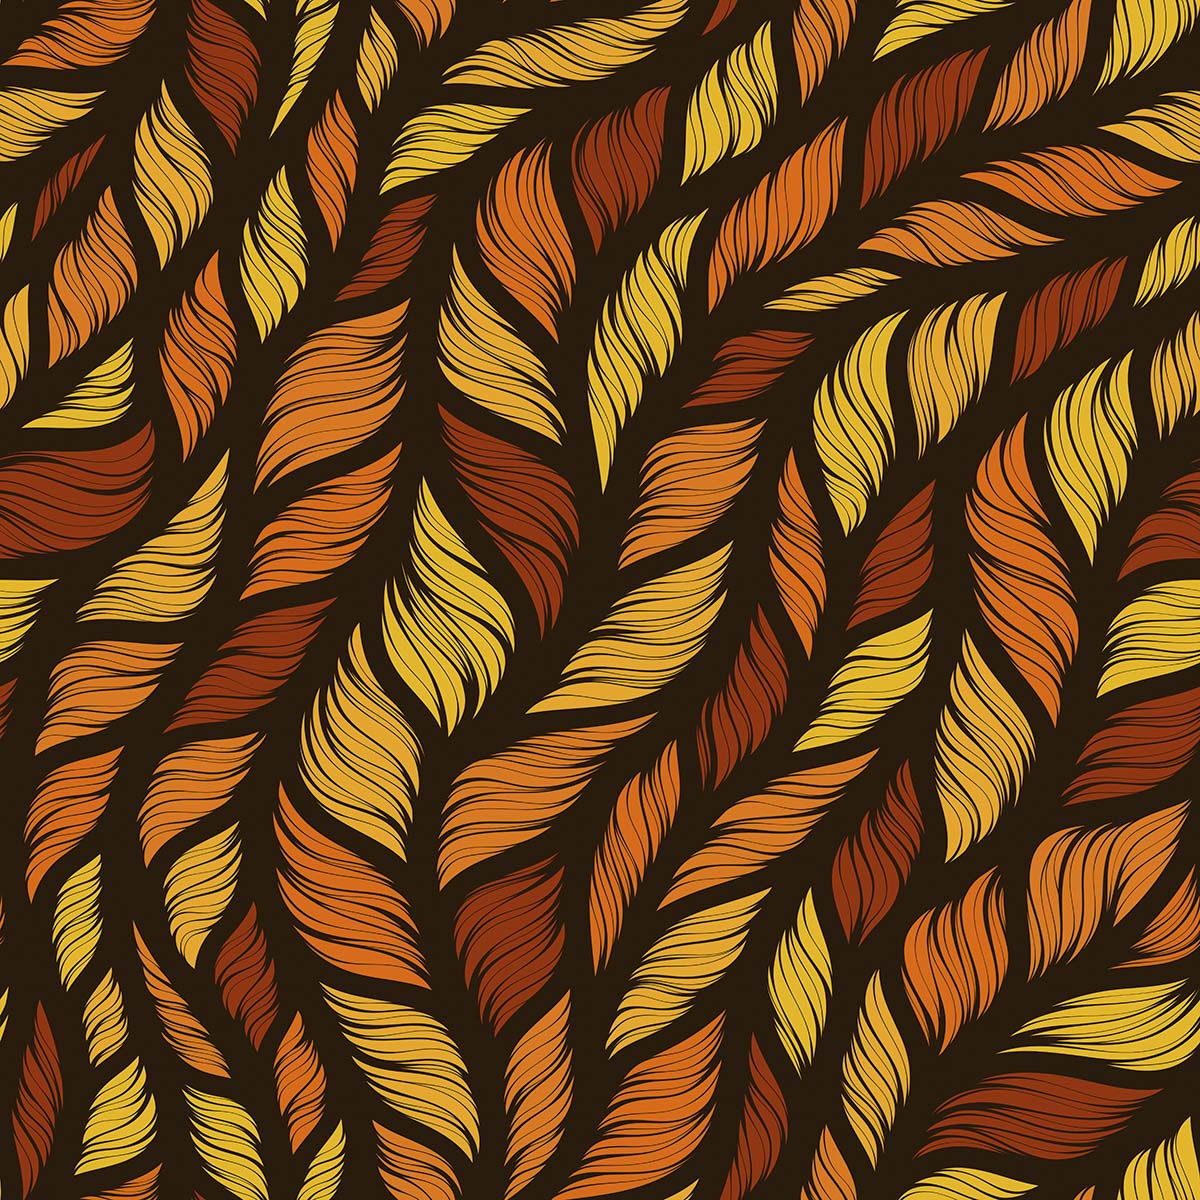 A pattern of orange and yellow leaves